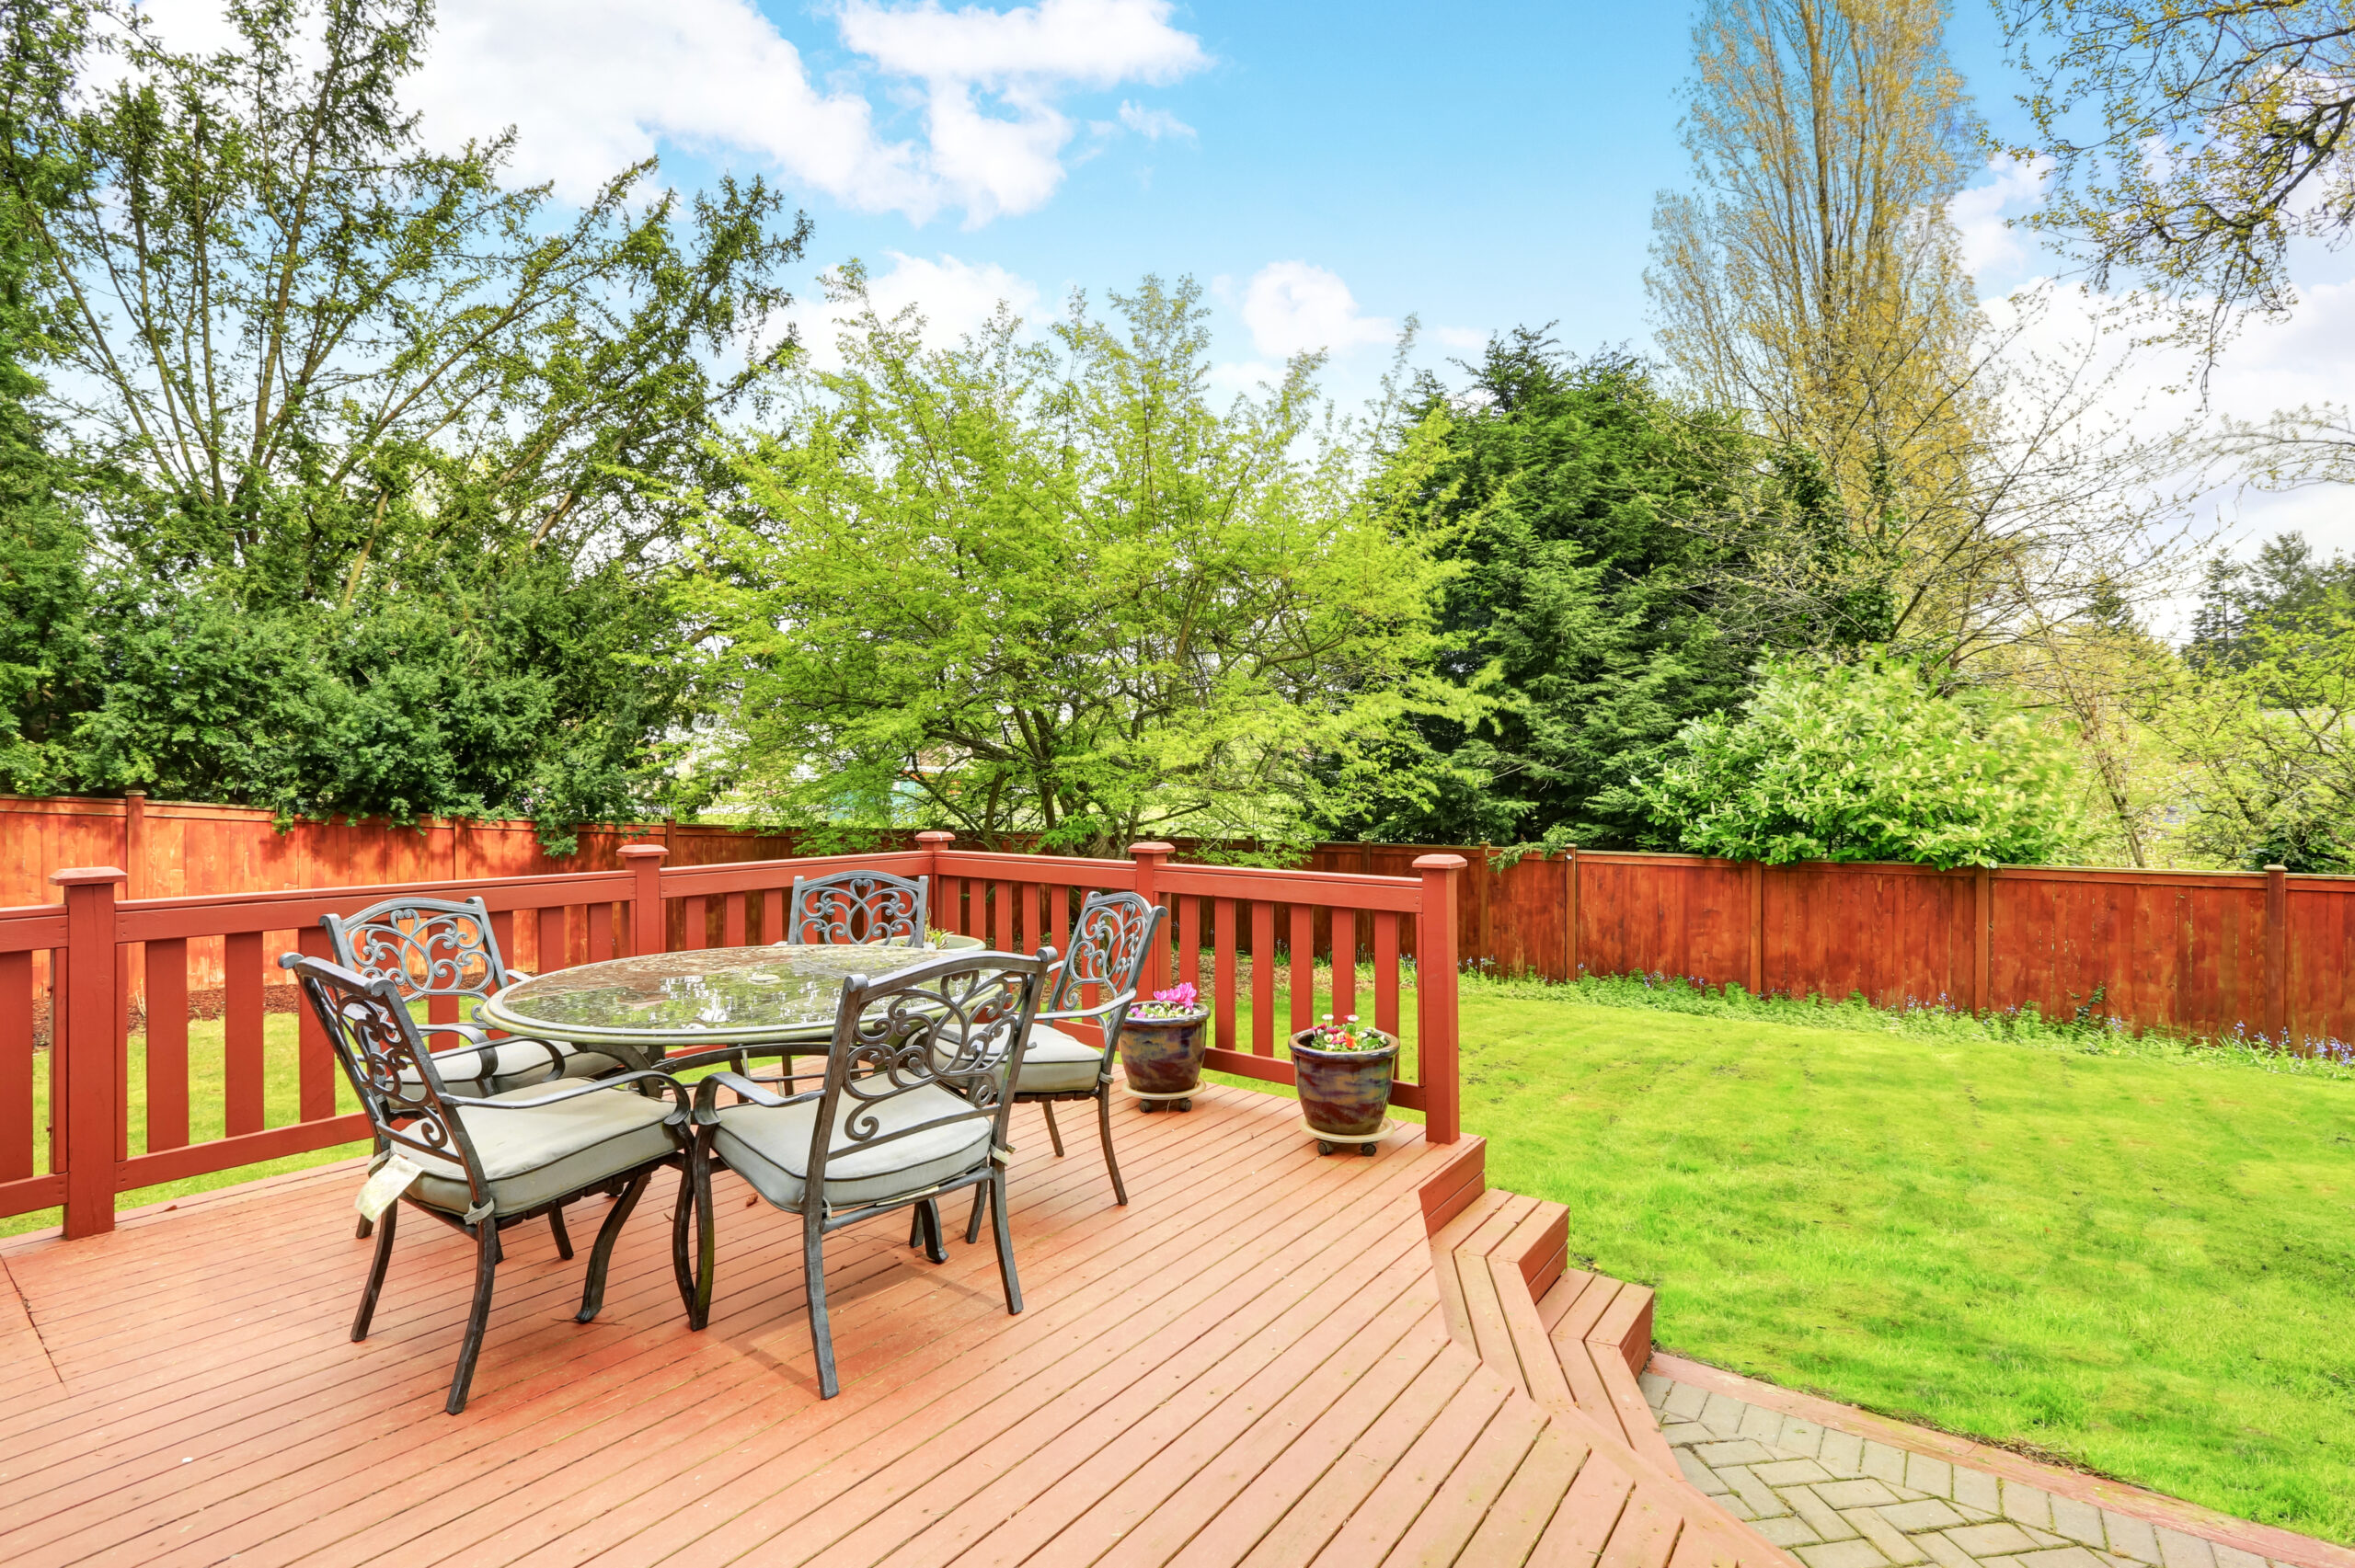 Large deck with dining space overlooking spacious back yard.